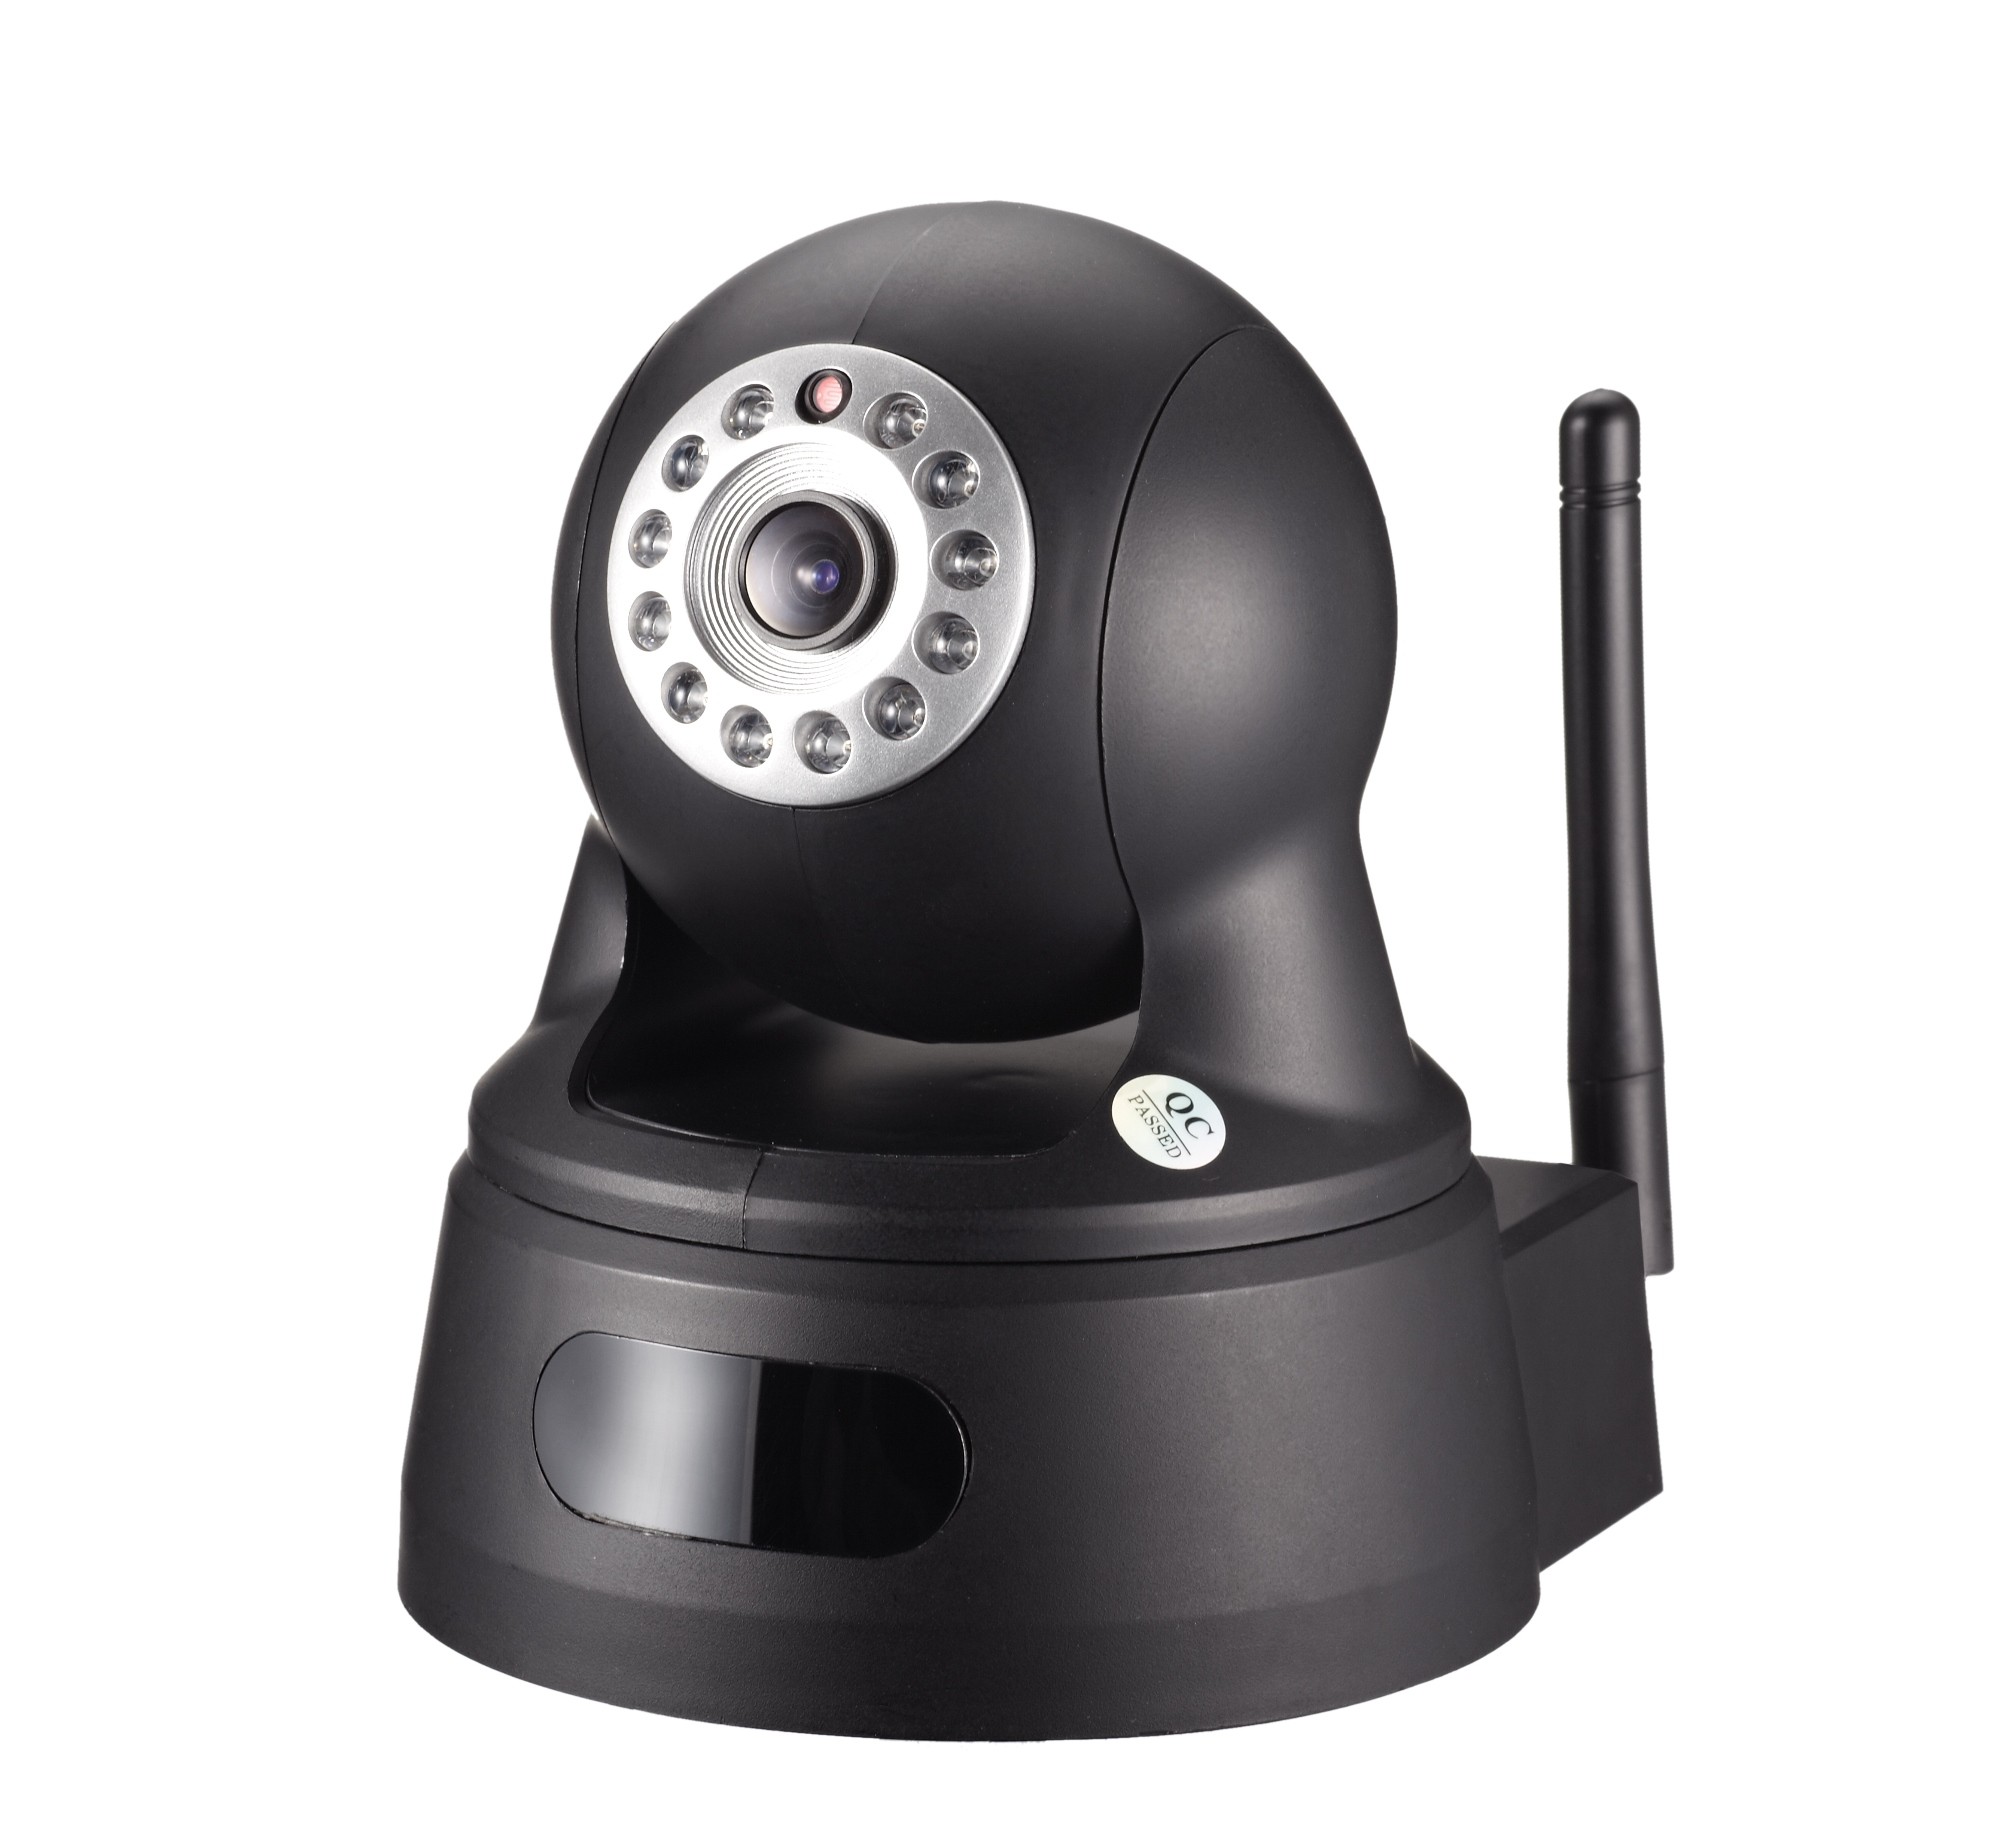 China 720P 1.0 Megapixel Household IP Camera with WIFI, P2P Function DR-Eye01LB (black) for sale